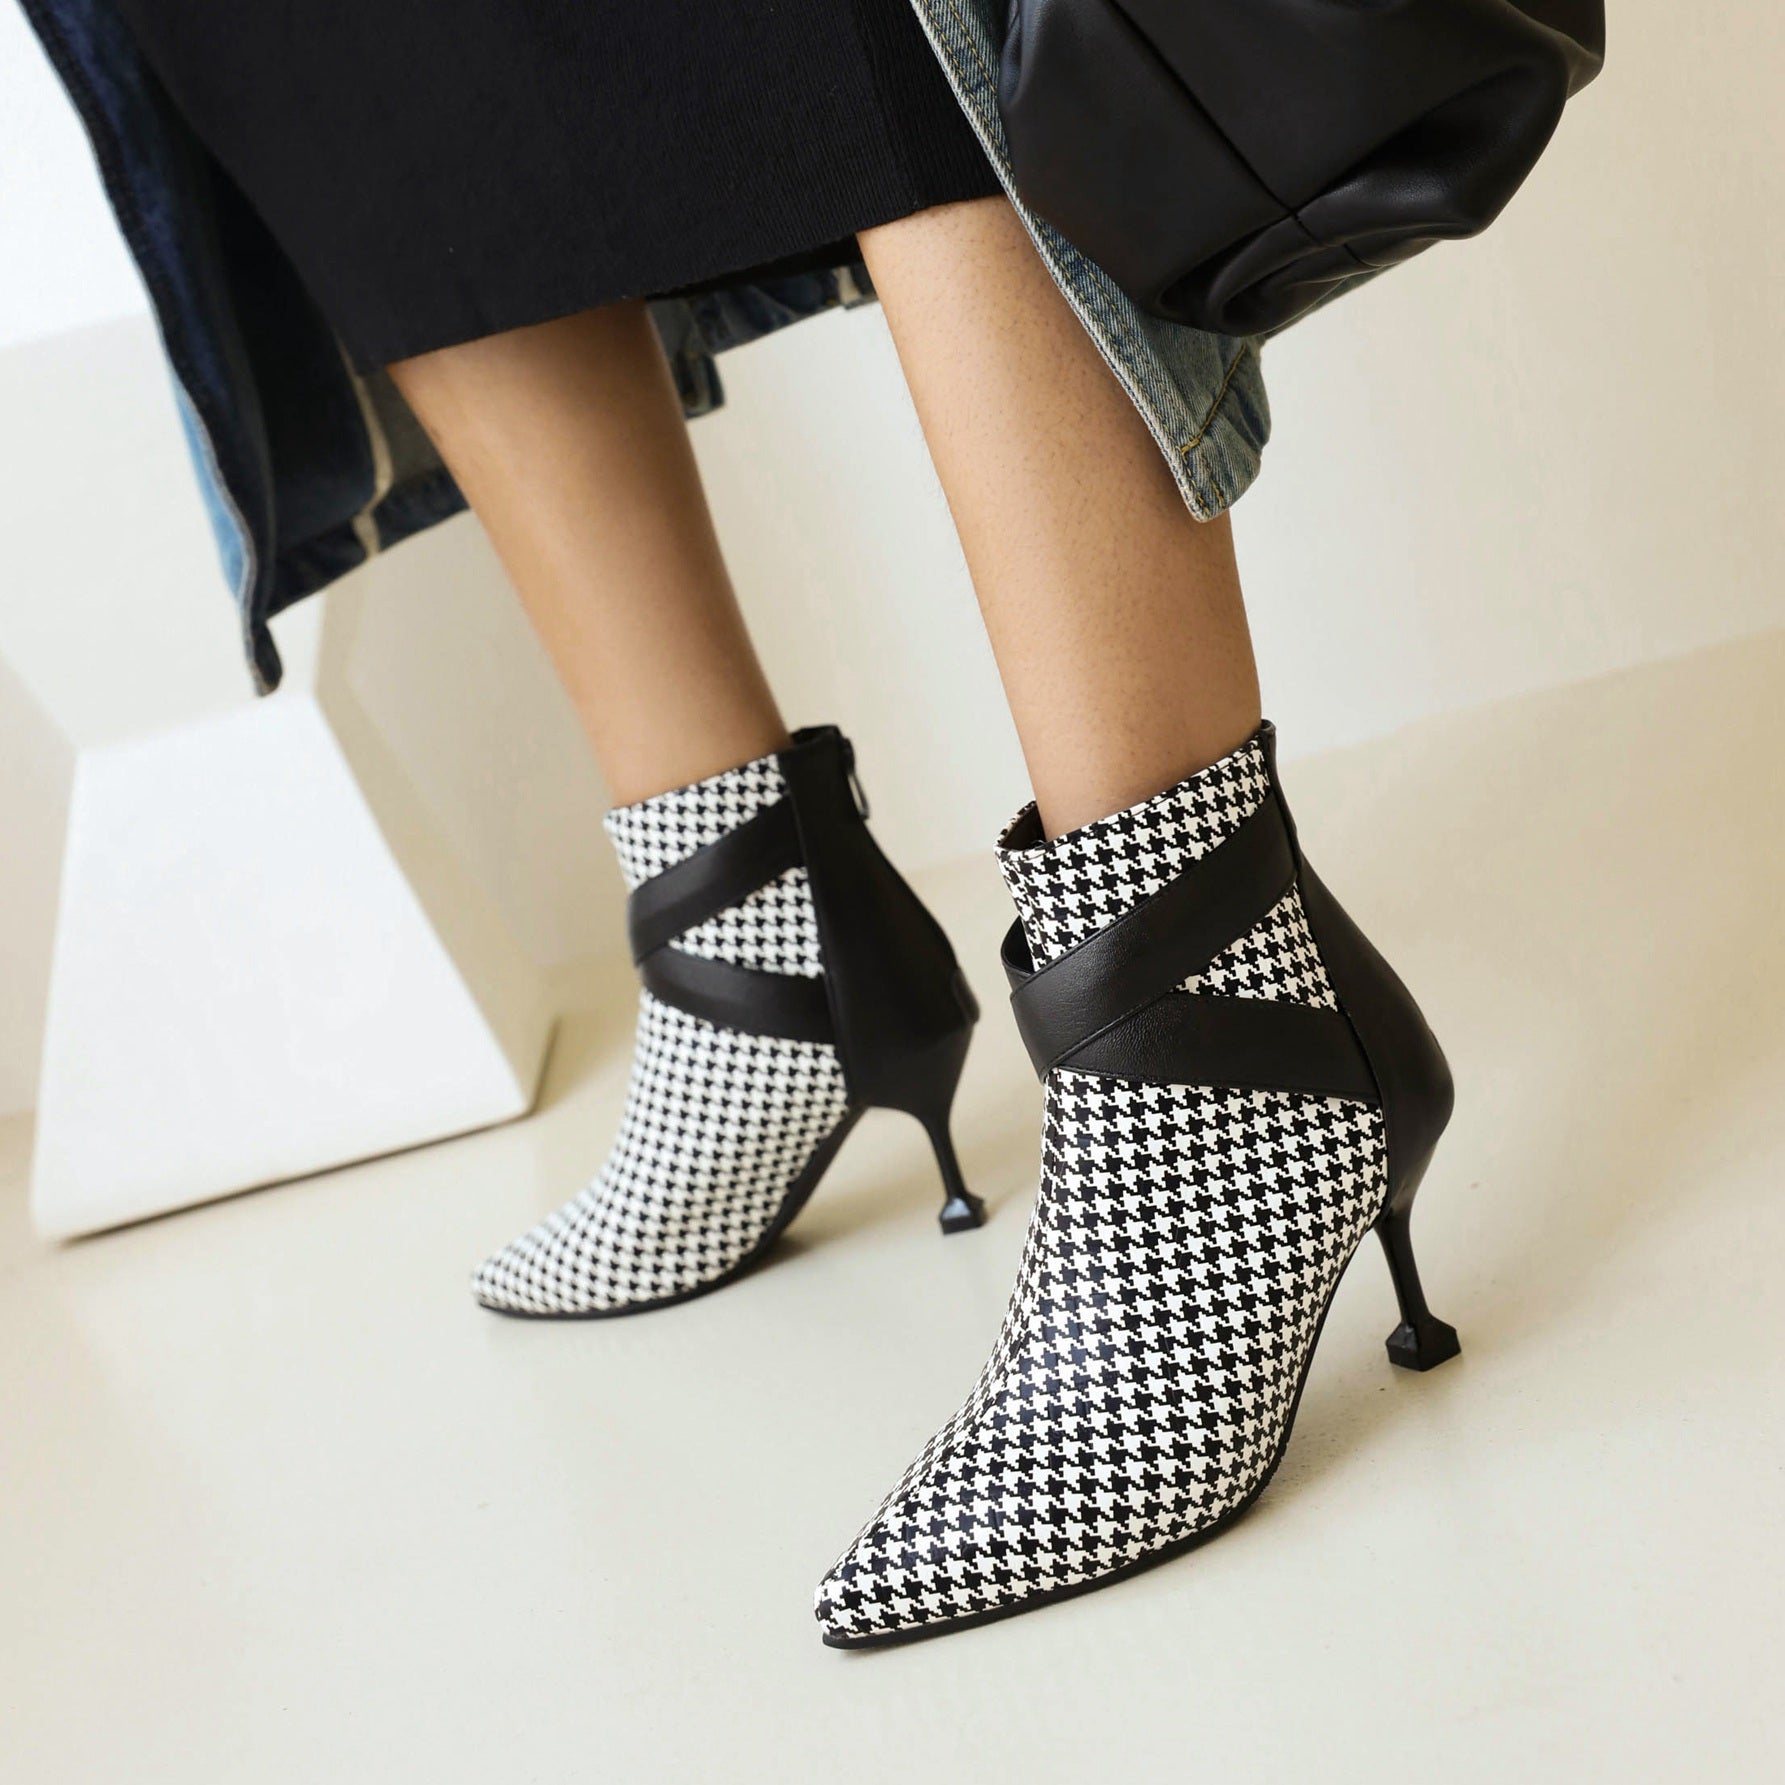 Bigsizeheels Sexy pointy zipper ankle boots - Houndstooth freeshipping - bigsizeheel®-size5-size15 -All Plus Sizes Available!